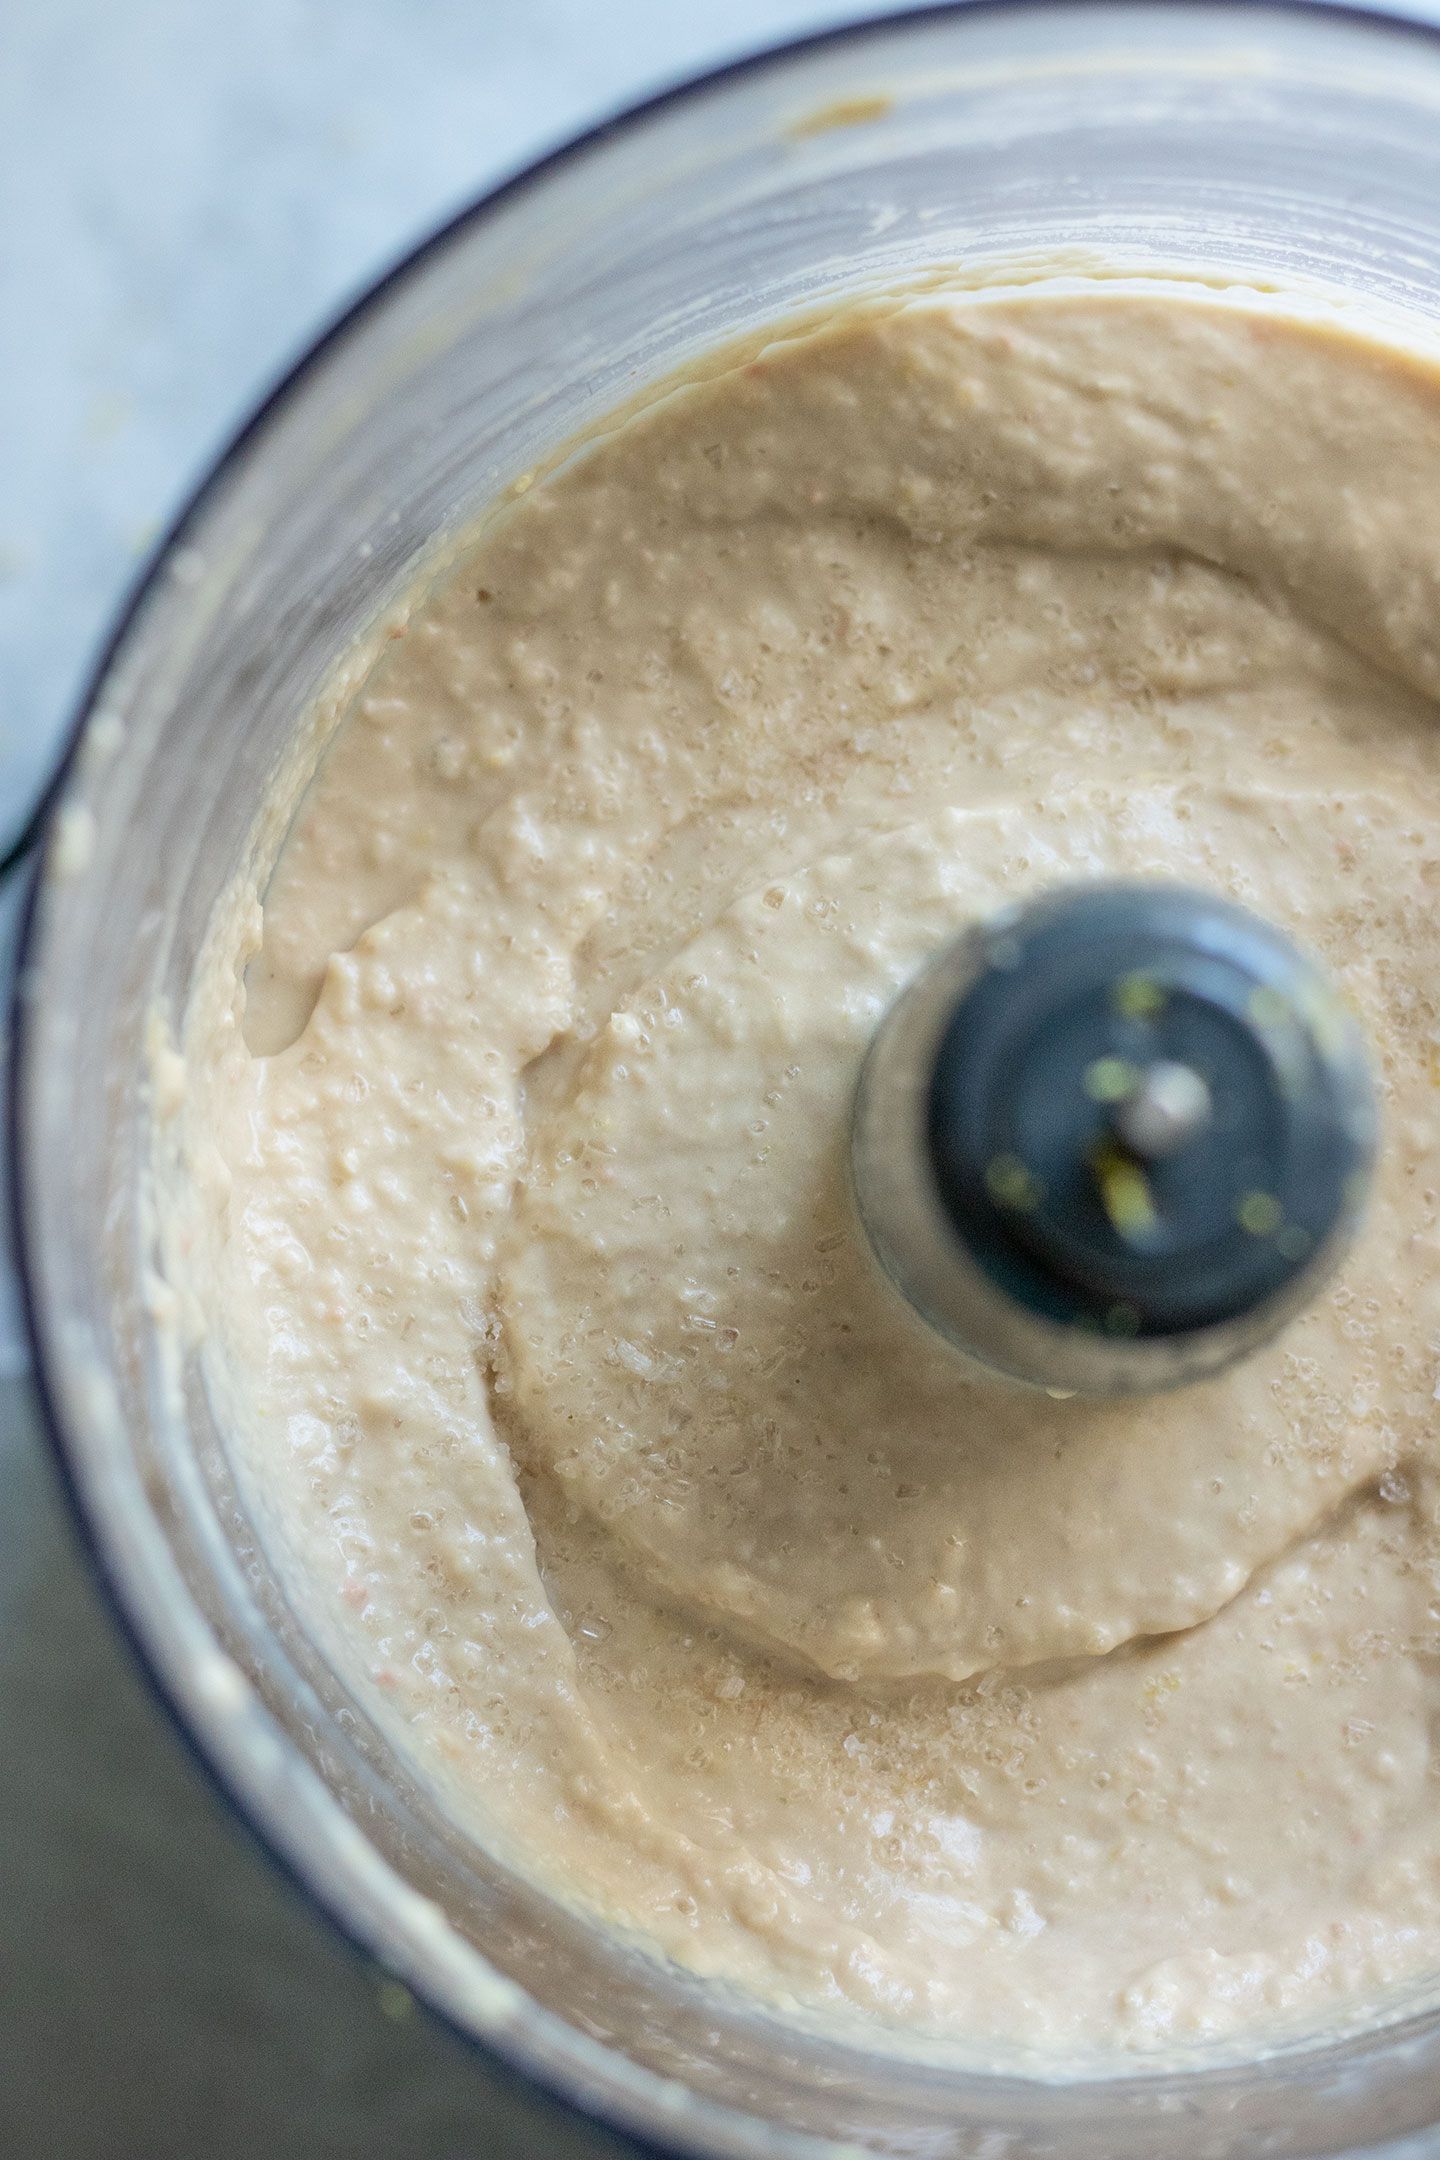 Blending the beans, tahini, lemon, garlic, miso together smooth in a food processor.